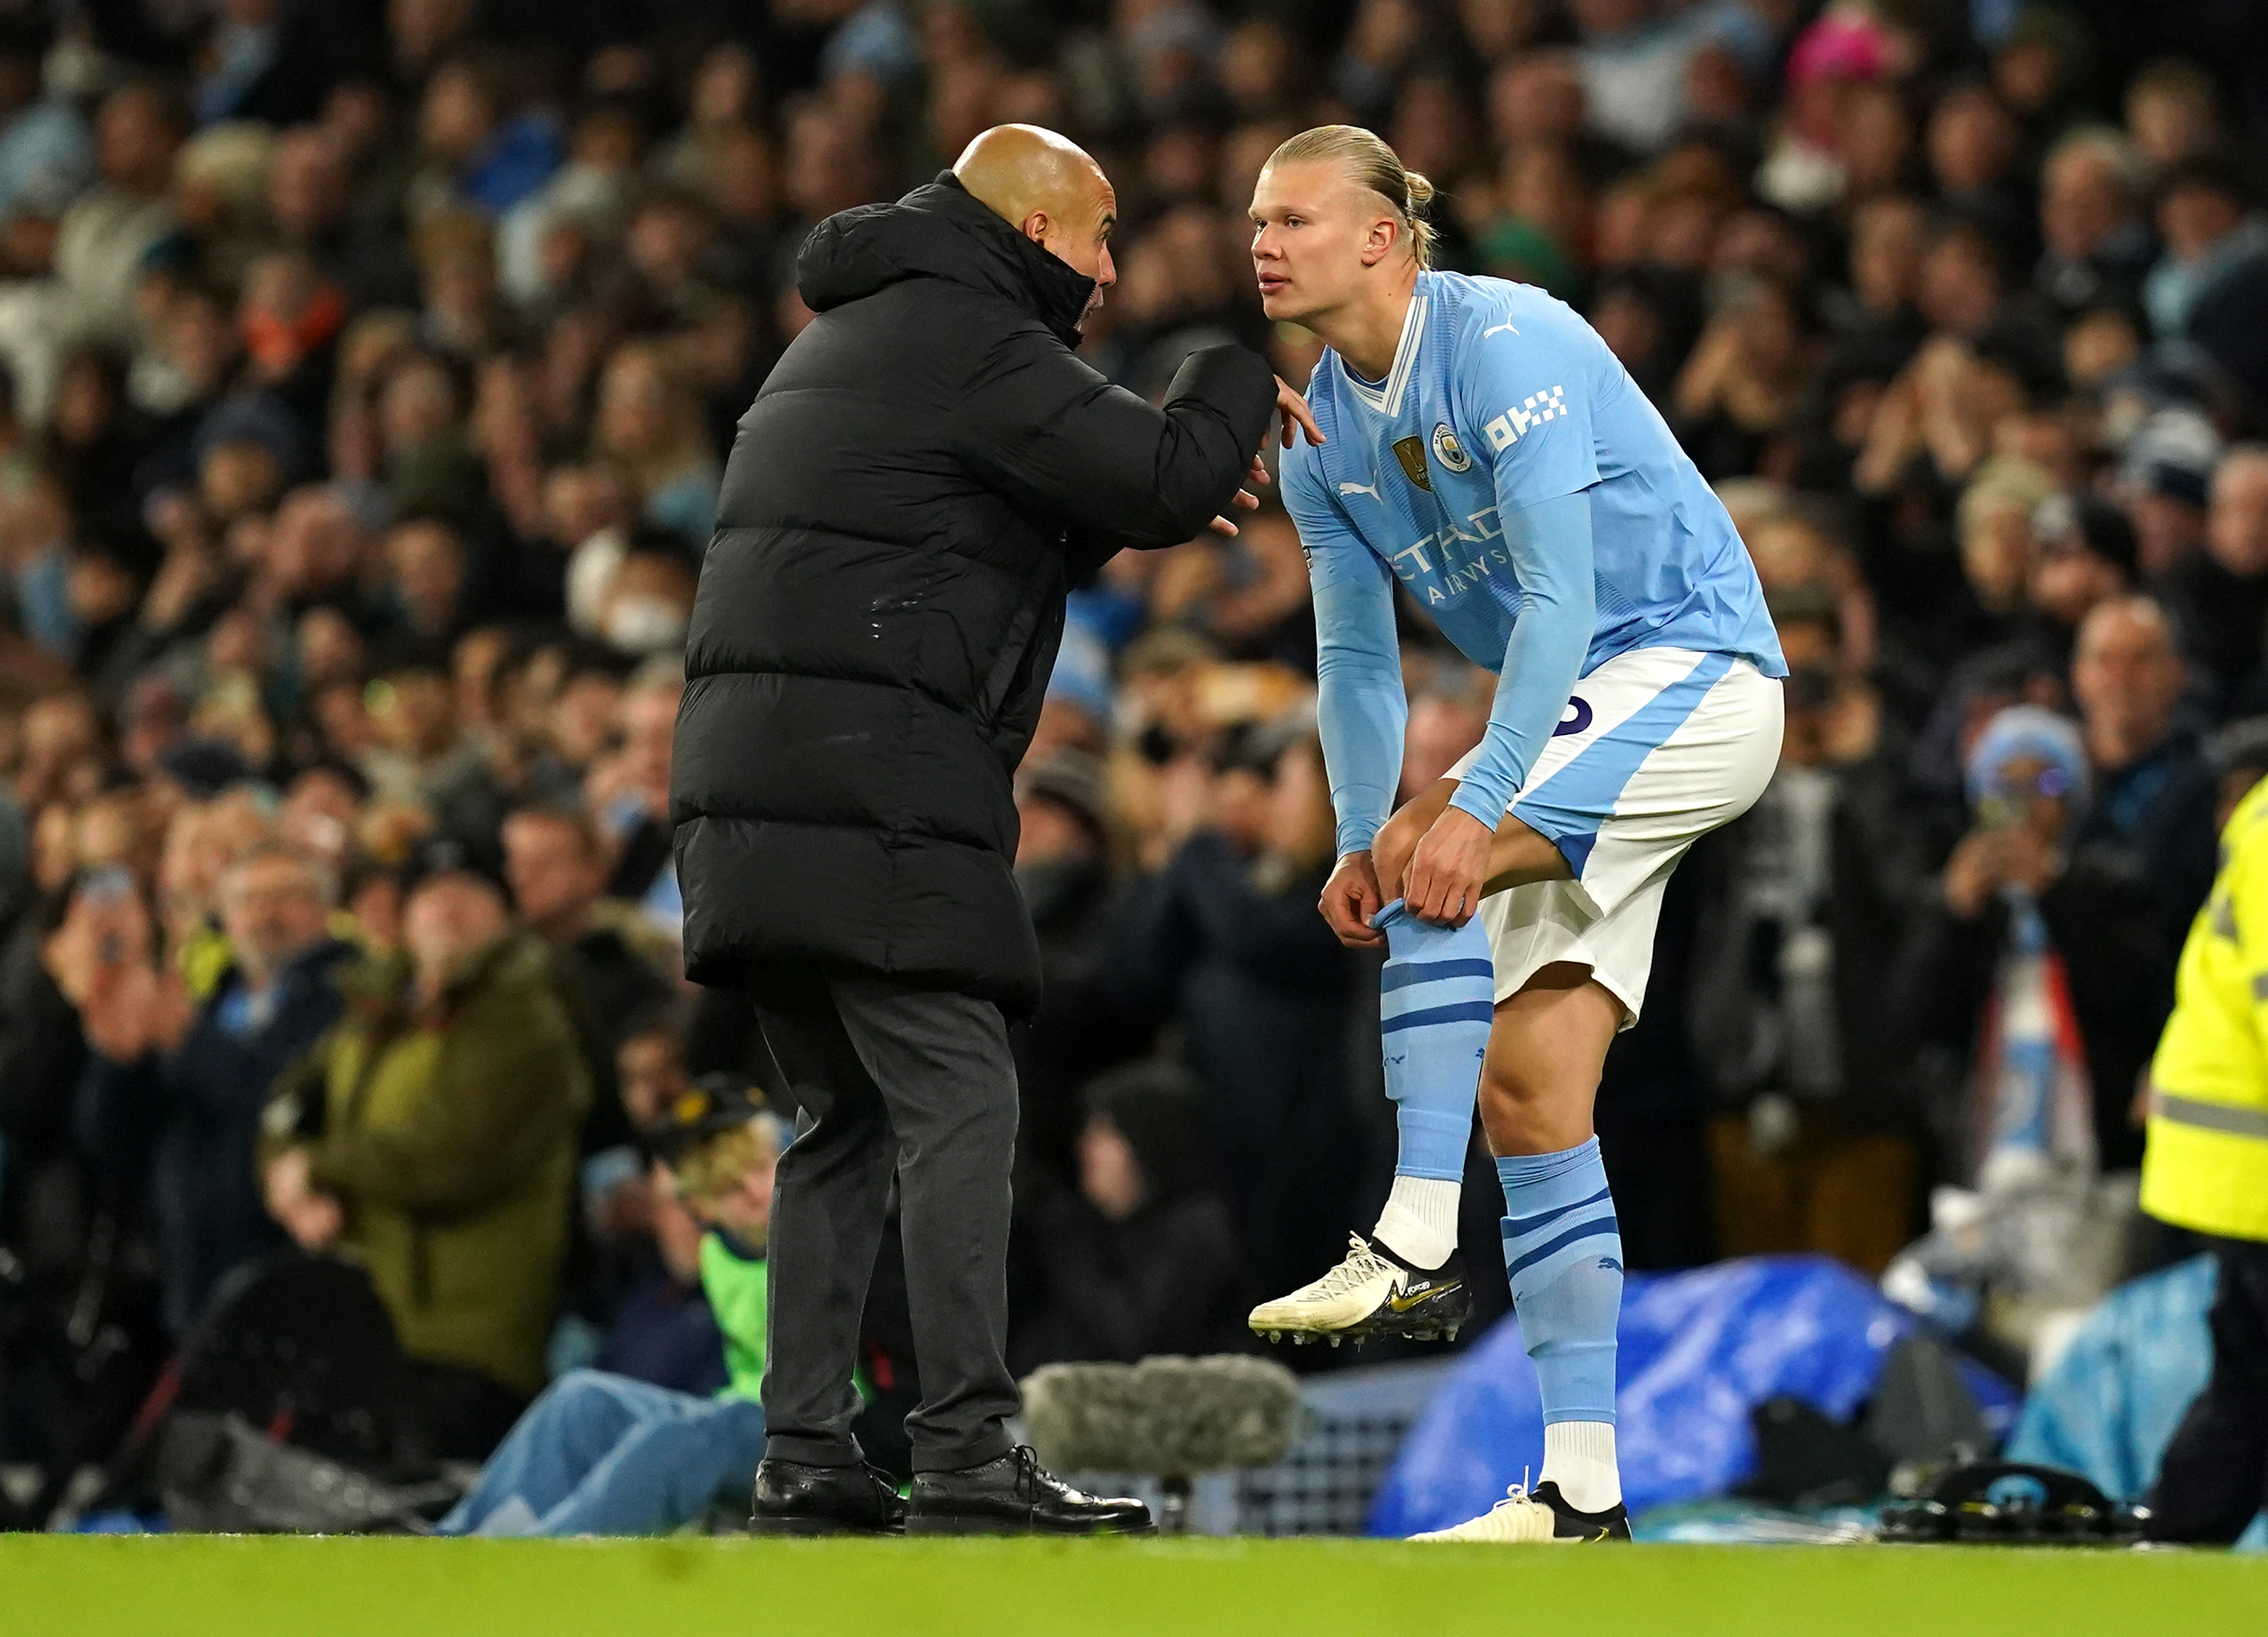 Manchester City manager Pep Guardiola speaks with Erling Haaland